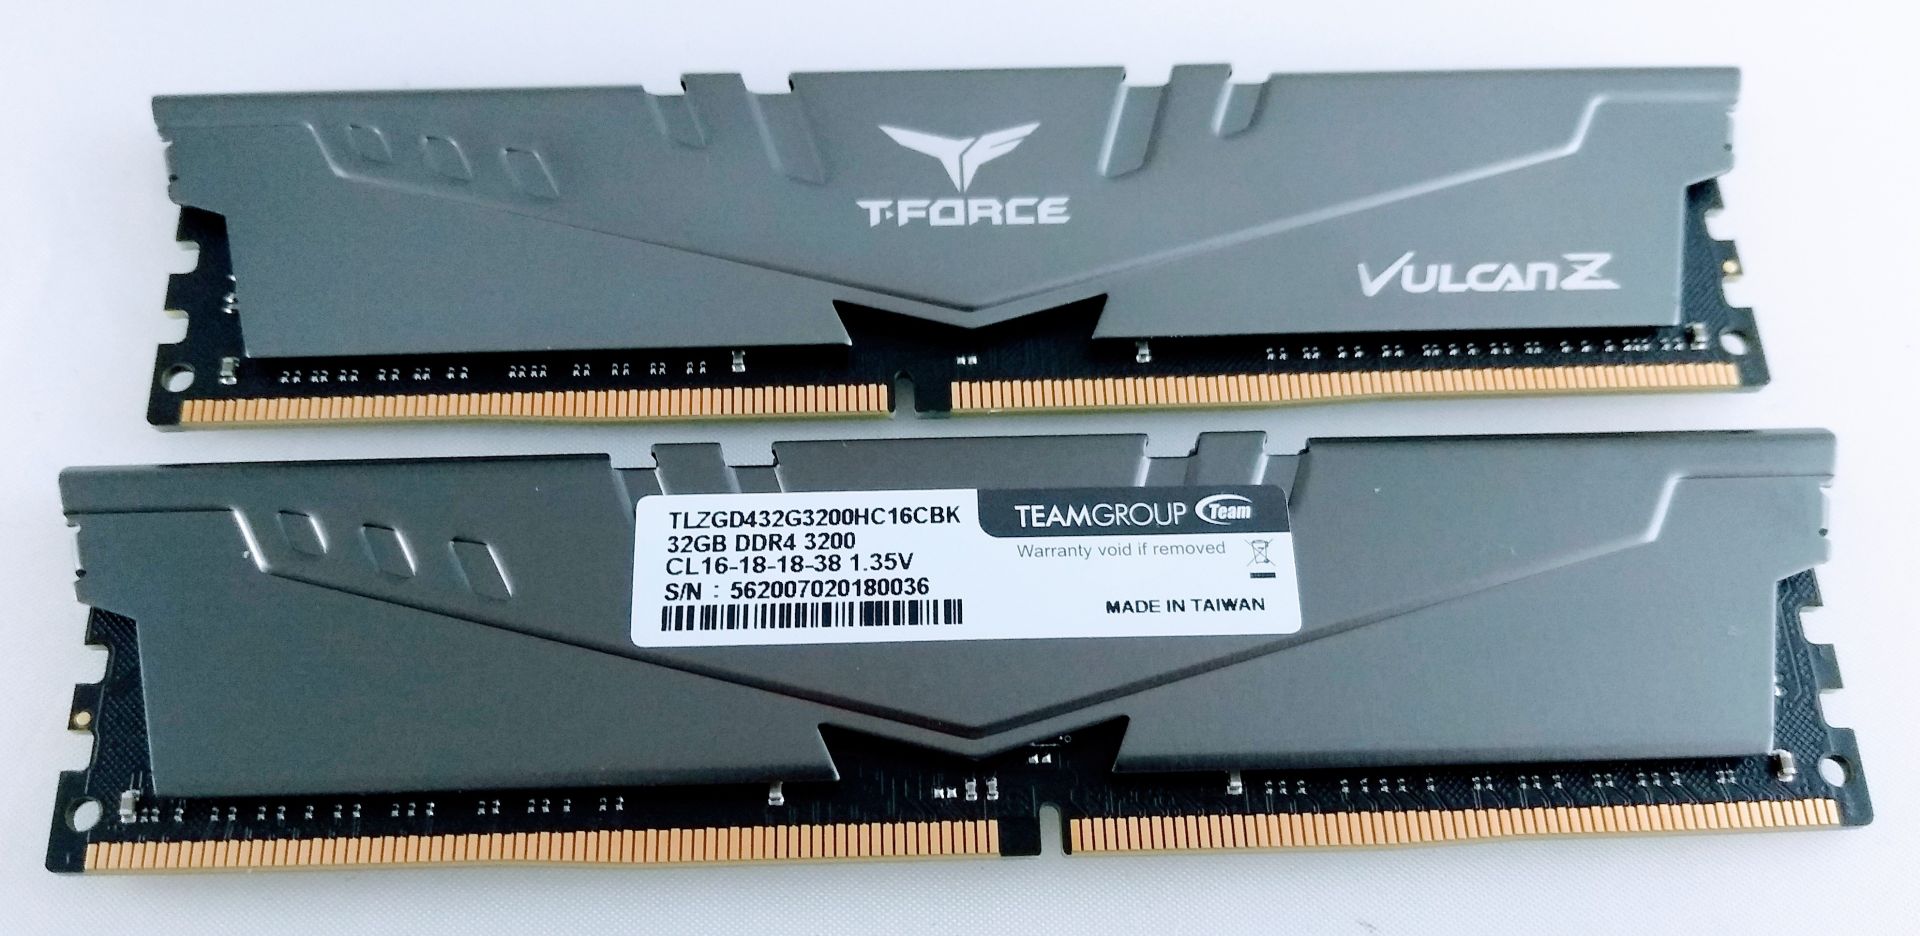 T-Force Vulcan Z DDR4: 64 GB on a budget - Overclockers